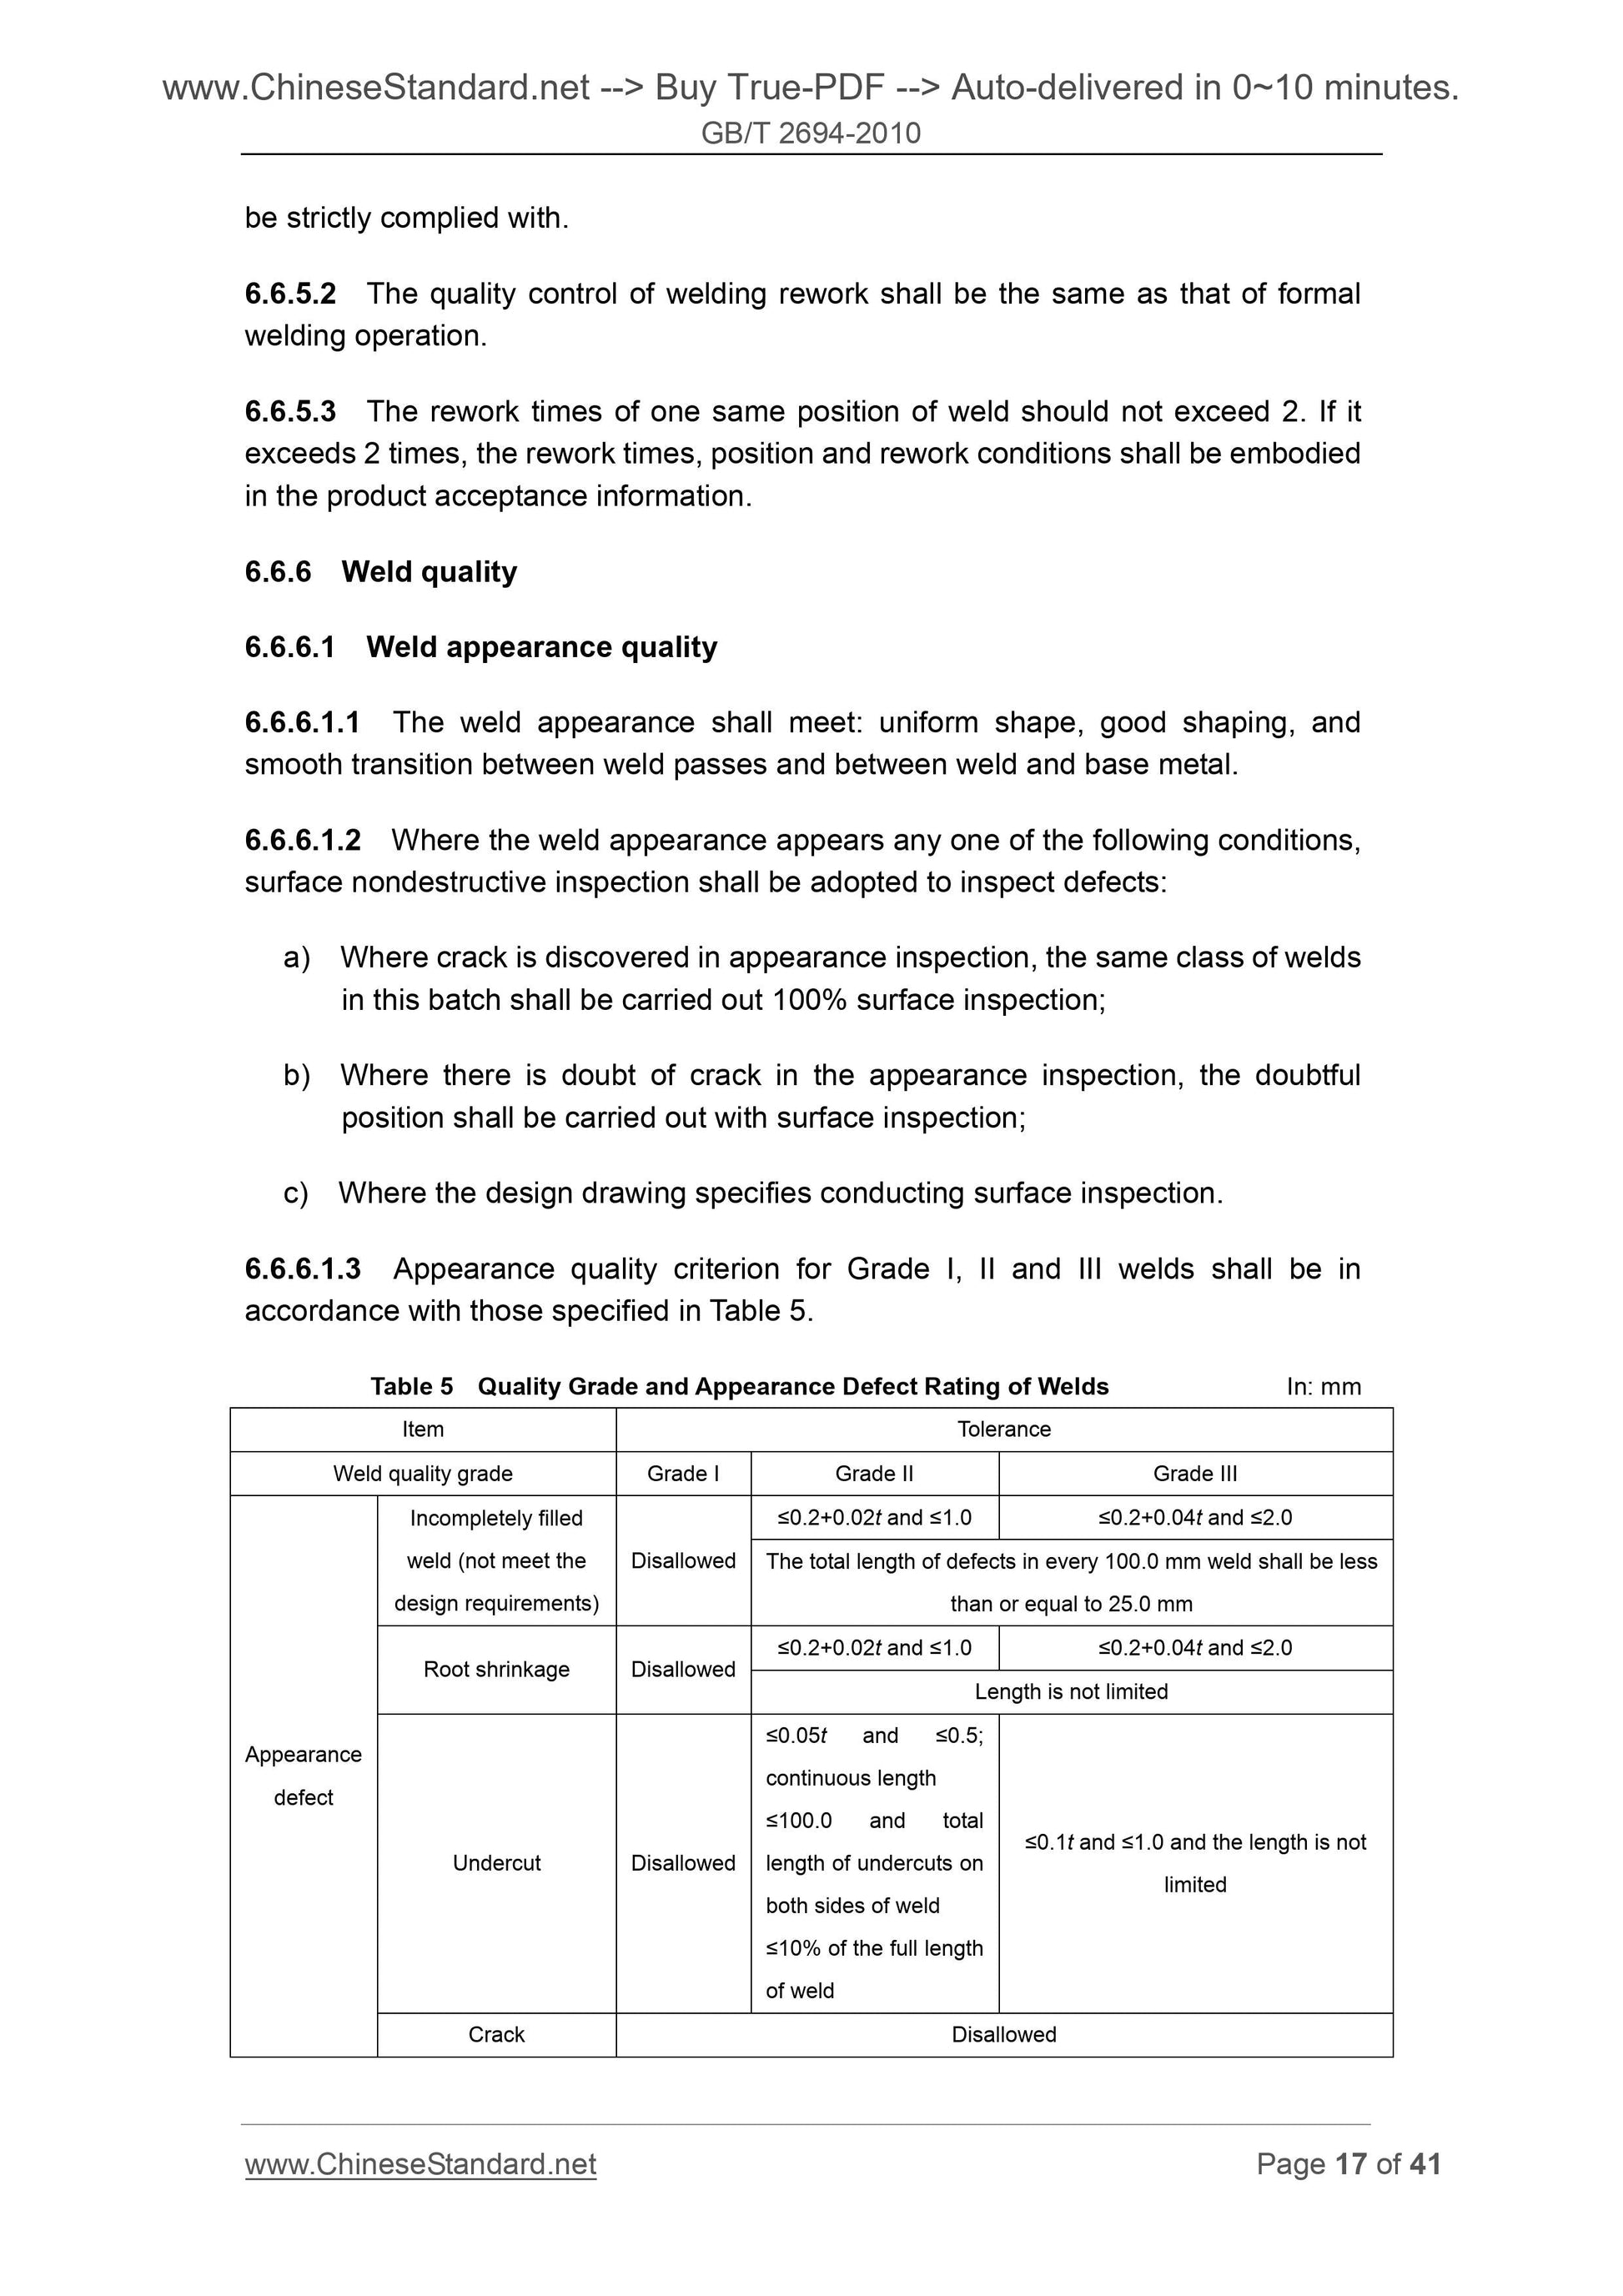 GB/T 2694-2010 Page 11